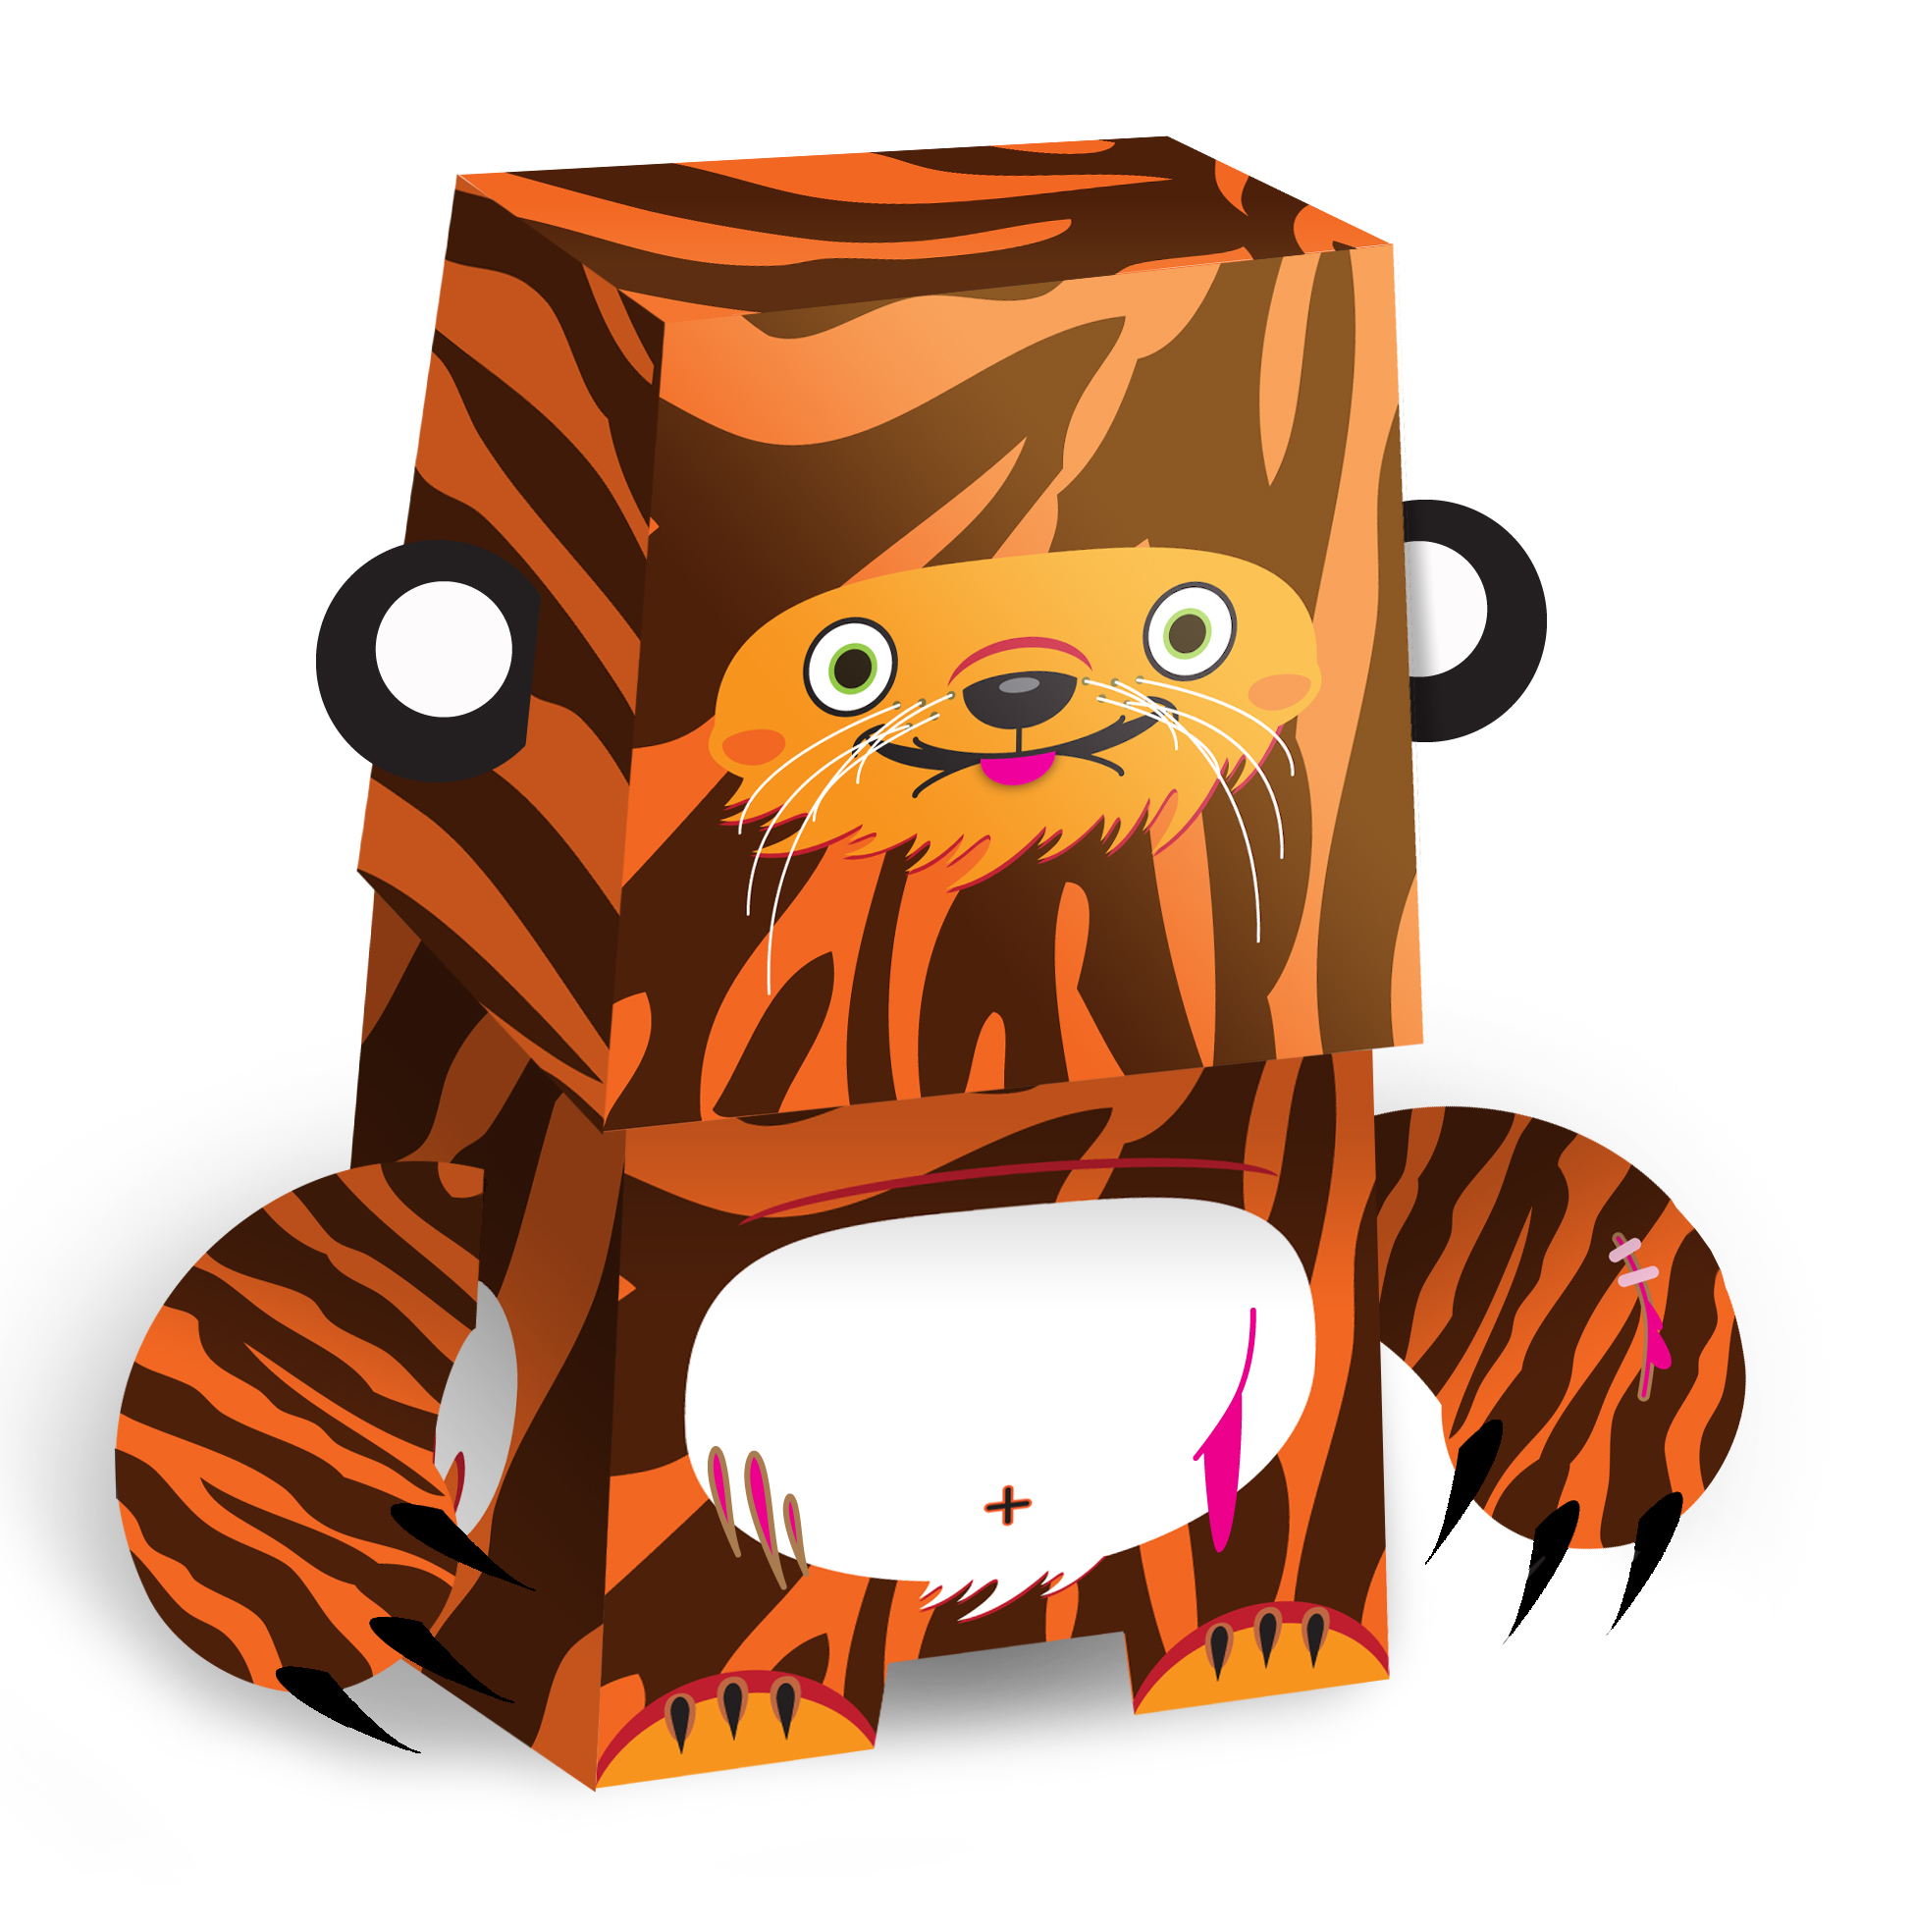 Paper Toy Design / Character Design